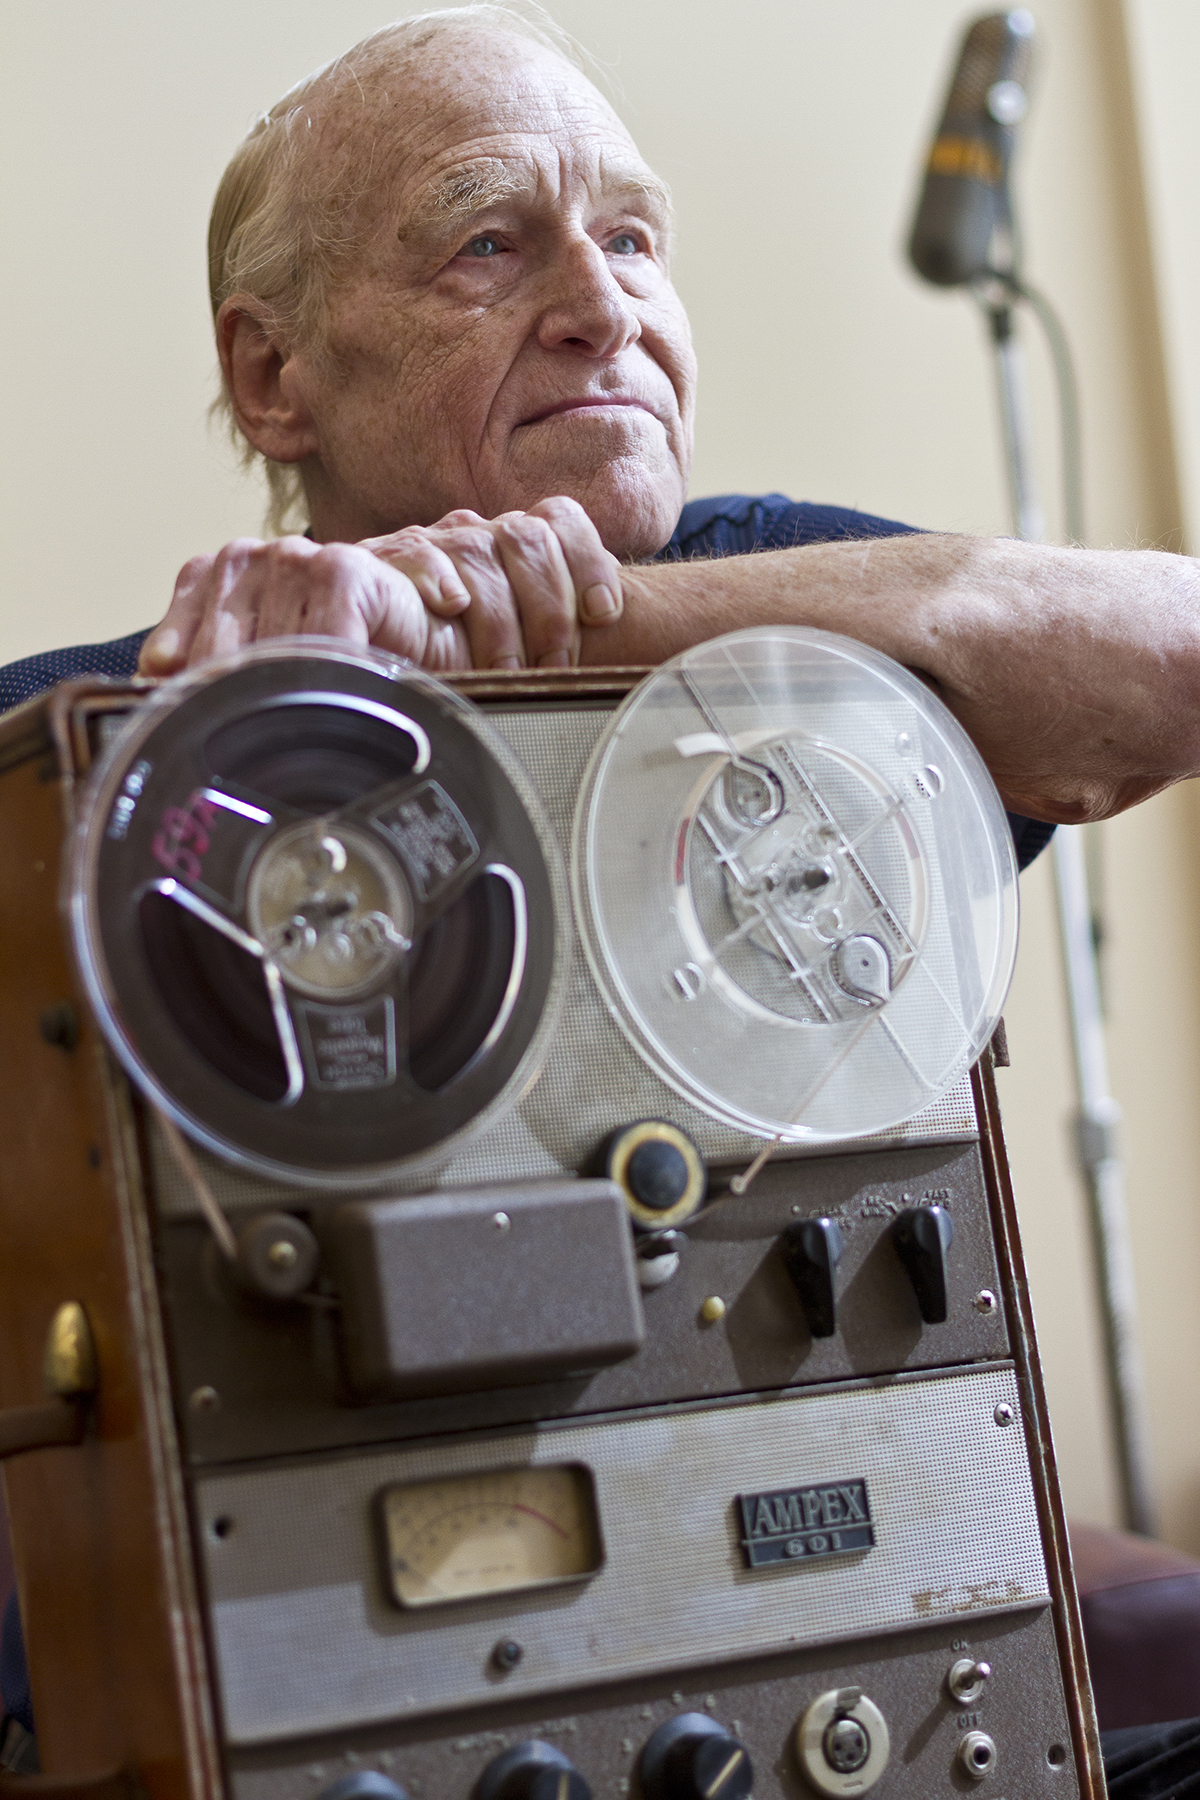 TCU alum Barto Farrar with the suitcase sized Ampex reel-to-reel tape recorder he used during his career. At TCU he interviewed celebrities that came through the area for the campus radio station. Photo by Mark Graham